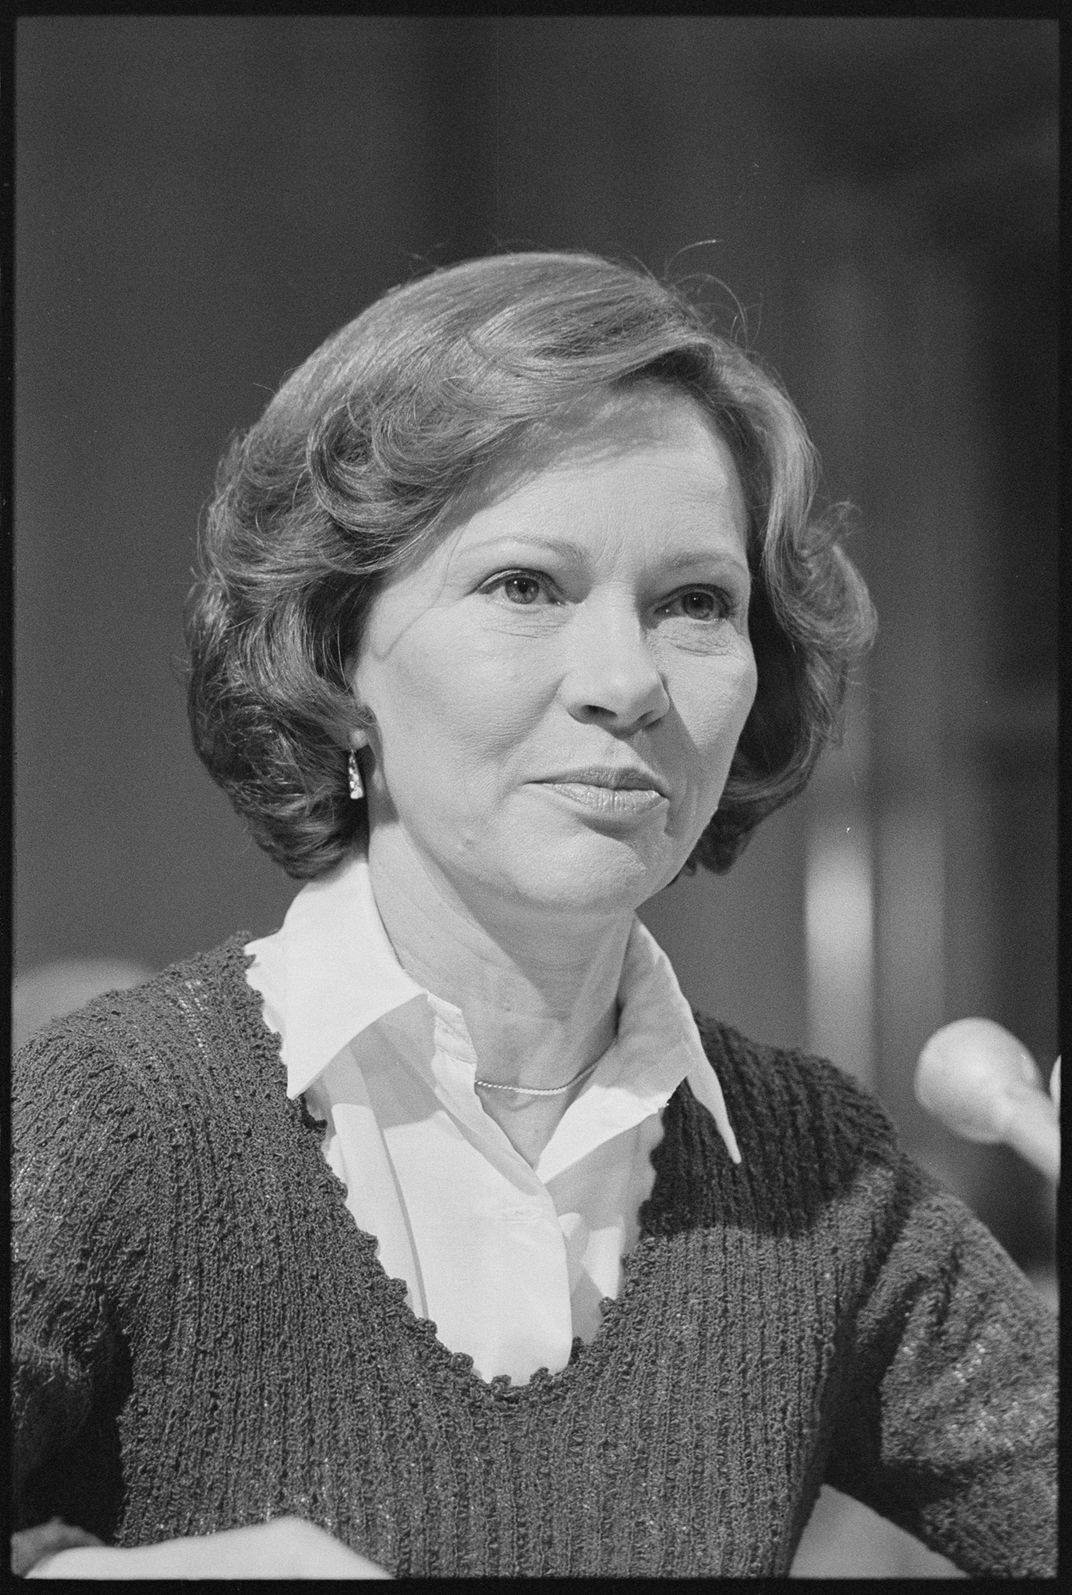 Rosalynn testifying in front of a Senate subcommittee on behalf of the President's Commission on Mental Health in 1979